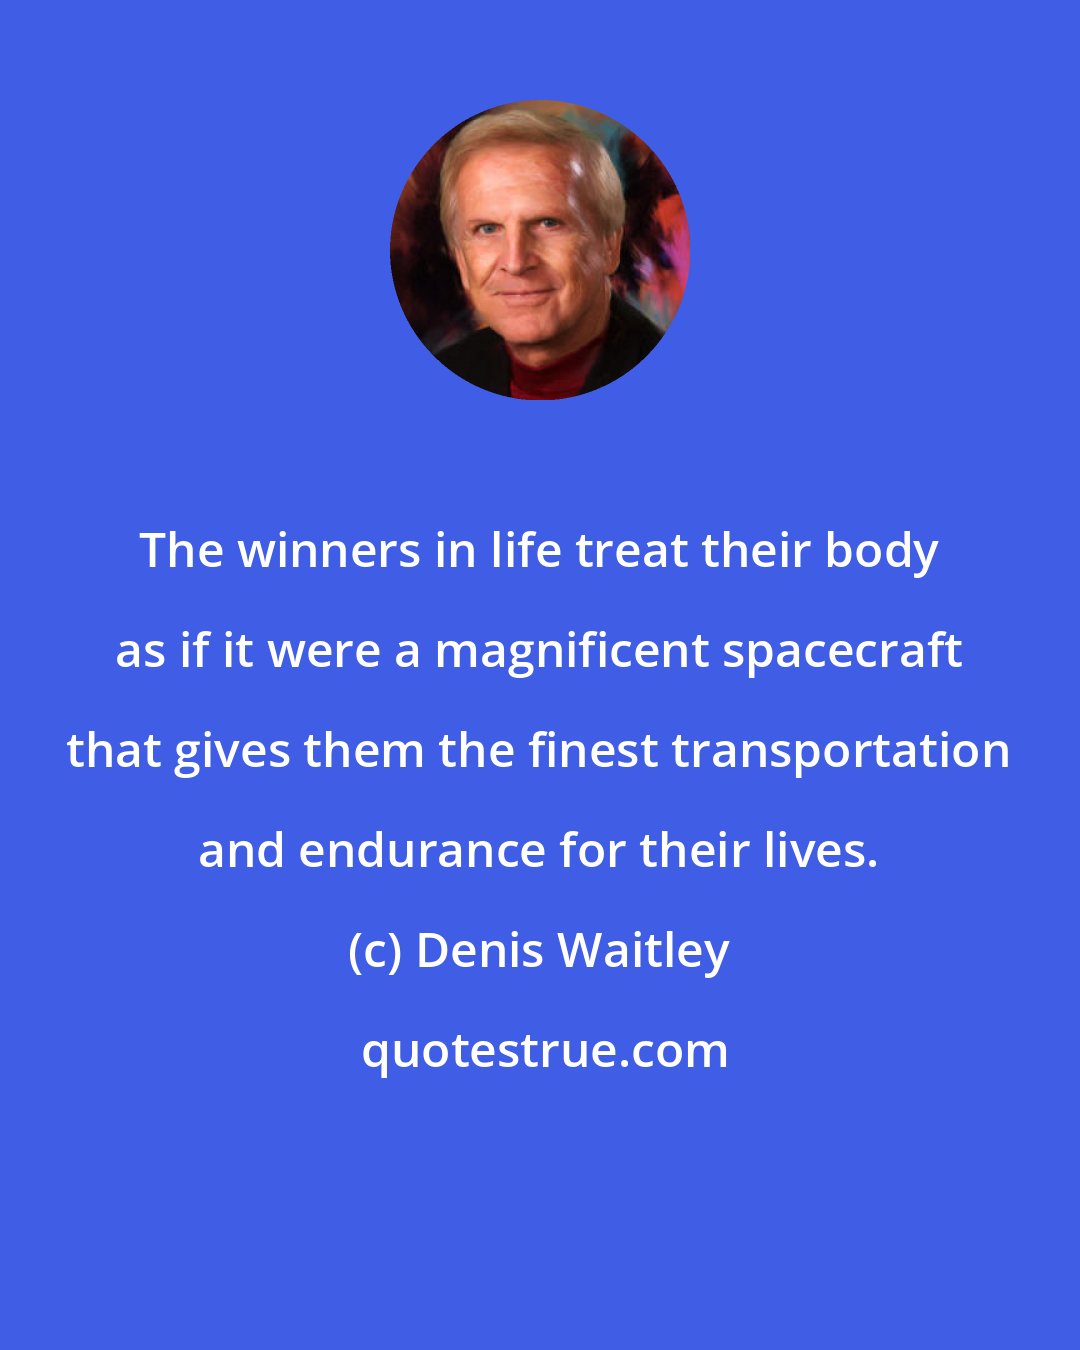 Denis Waitley: The winners in life treat their body as if it were a magnificent spacecraft that gives them the finest transportation and endurance for their lives.